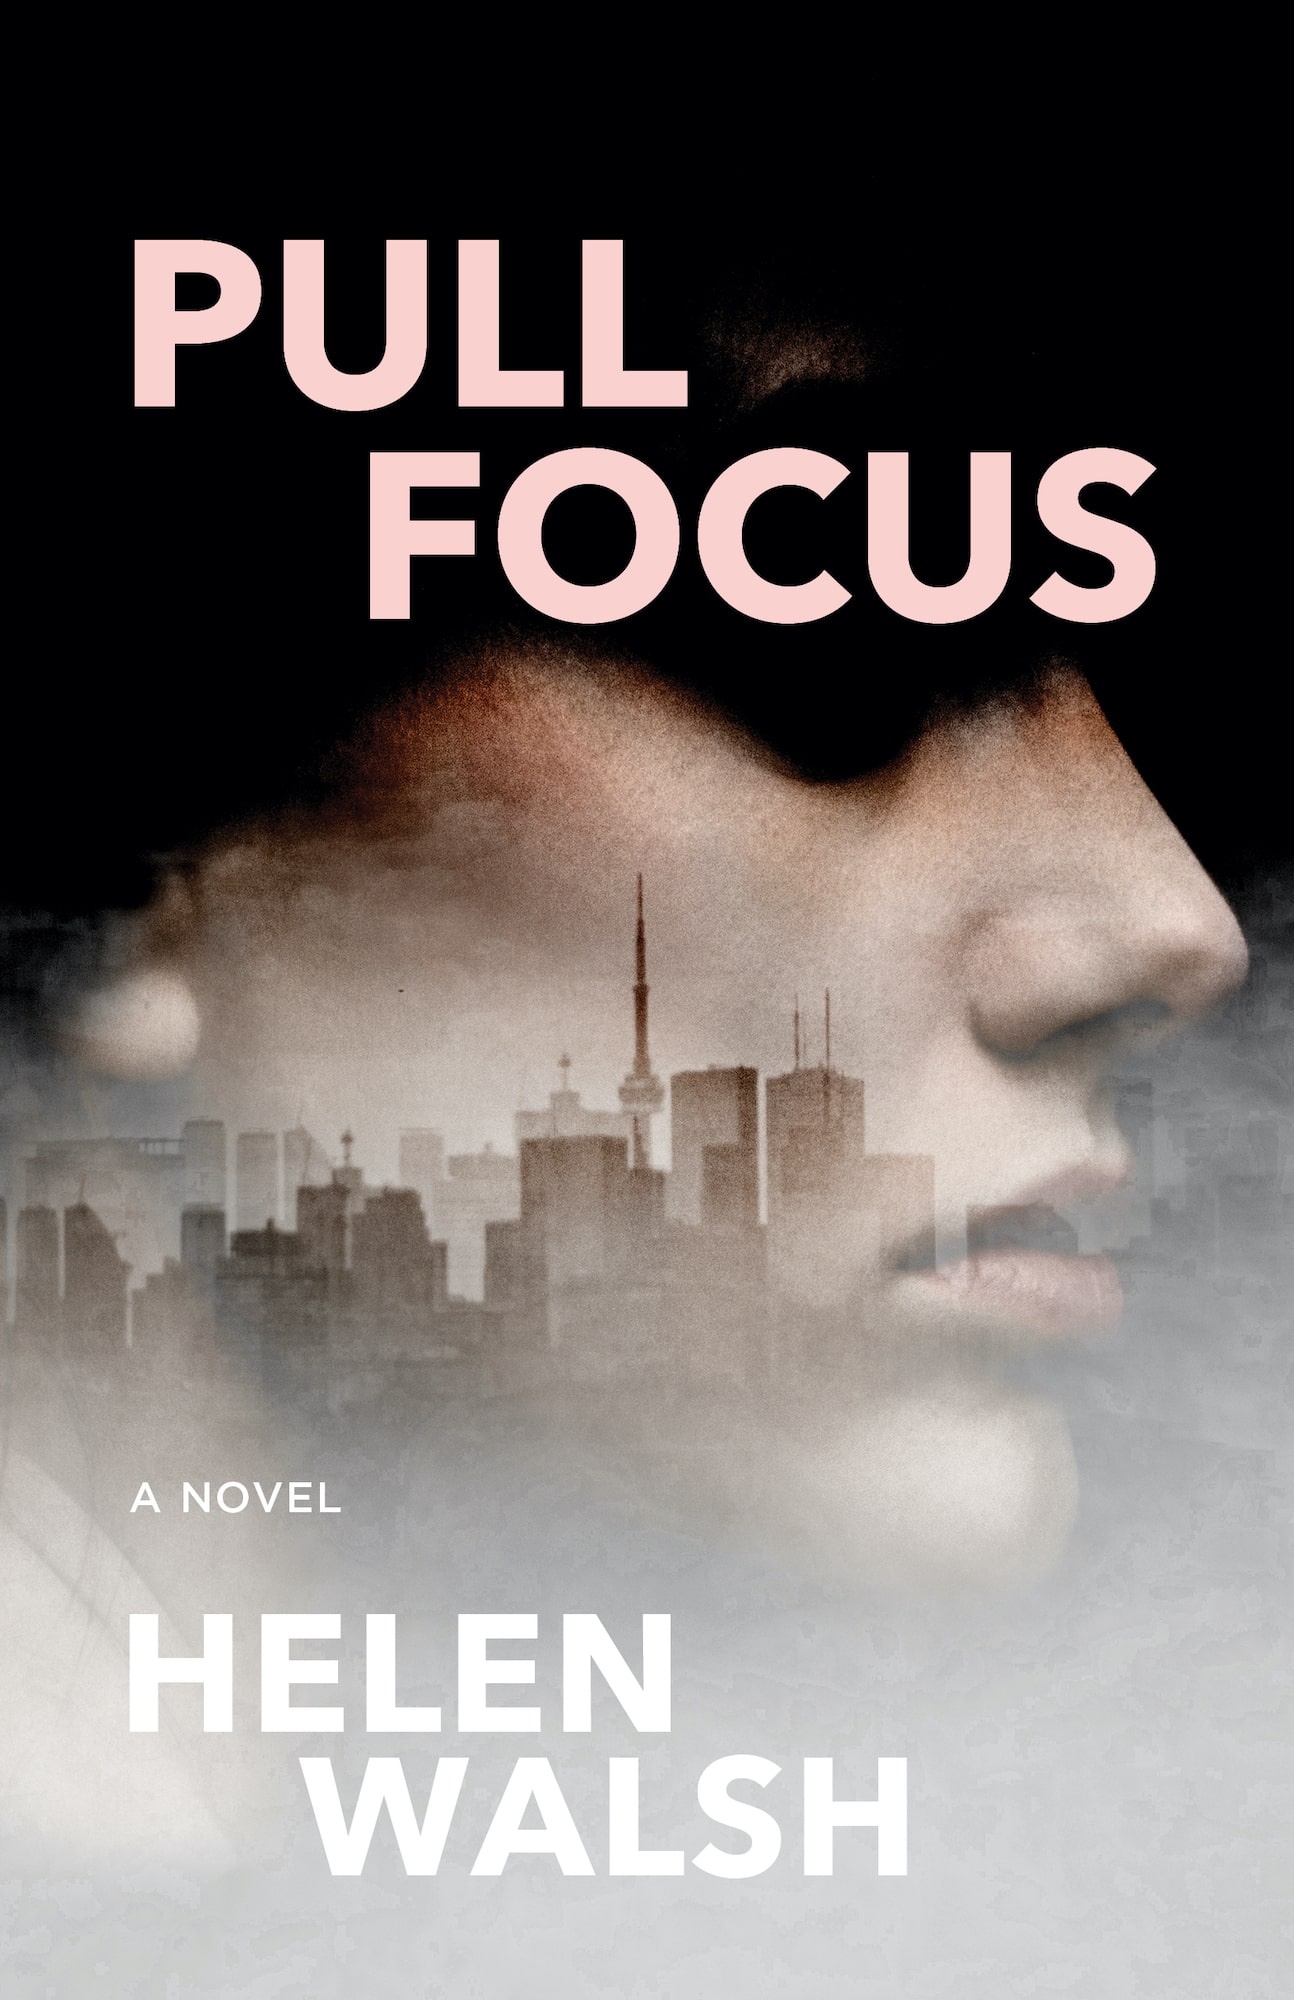 The new novel 'Pull Focus' by Helen Walsh dives into the heart of #MeToo and problems in the film industry. Discover the amazing author today.